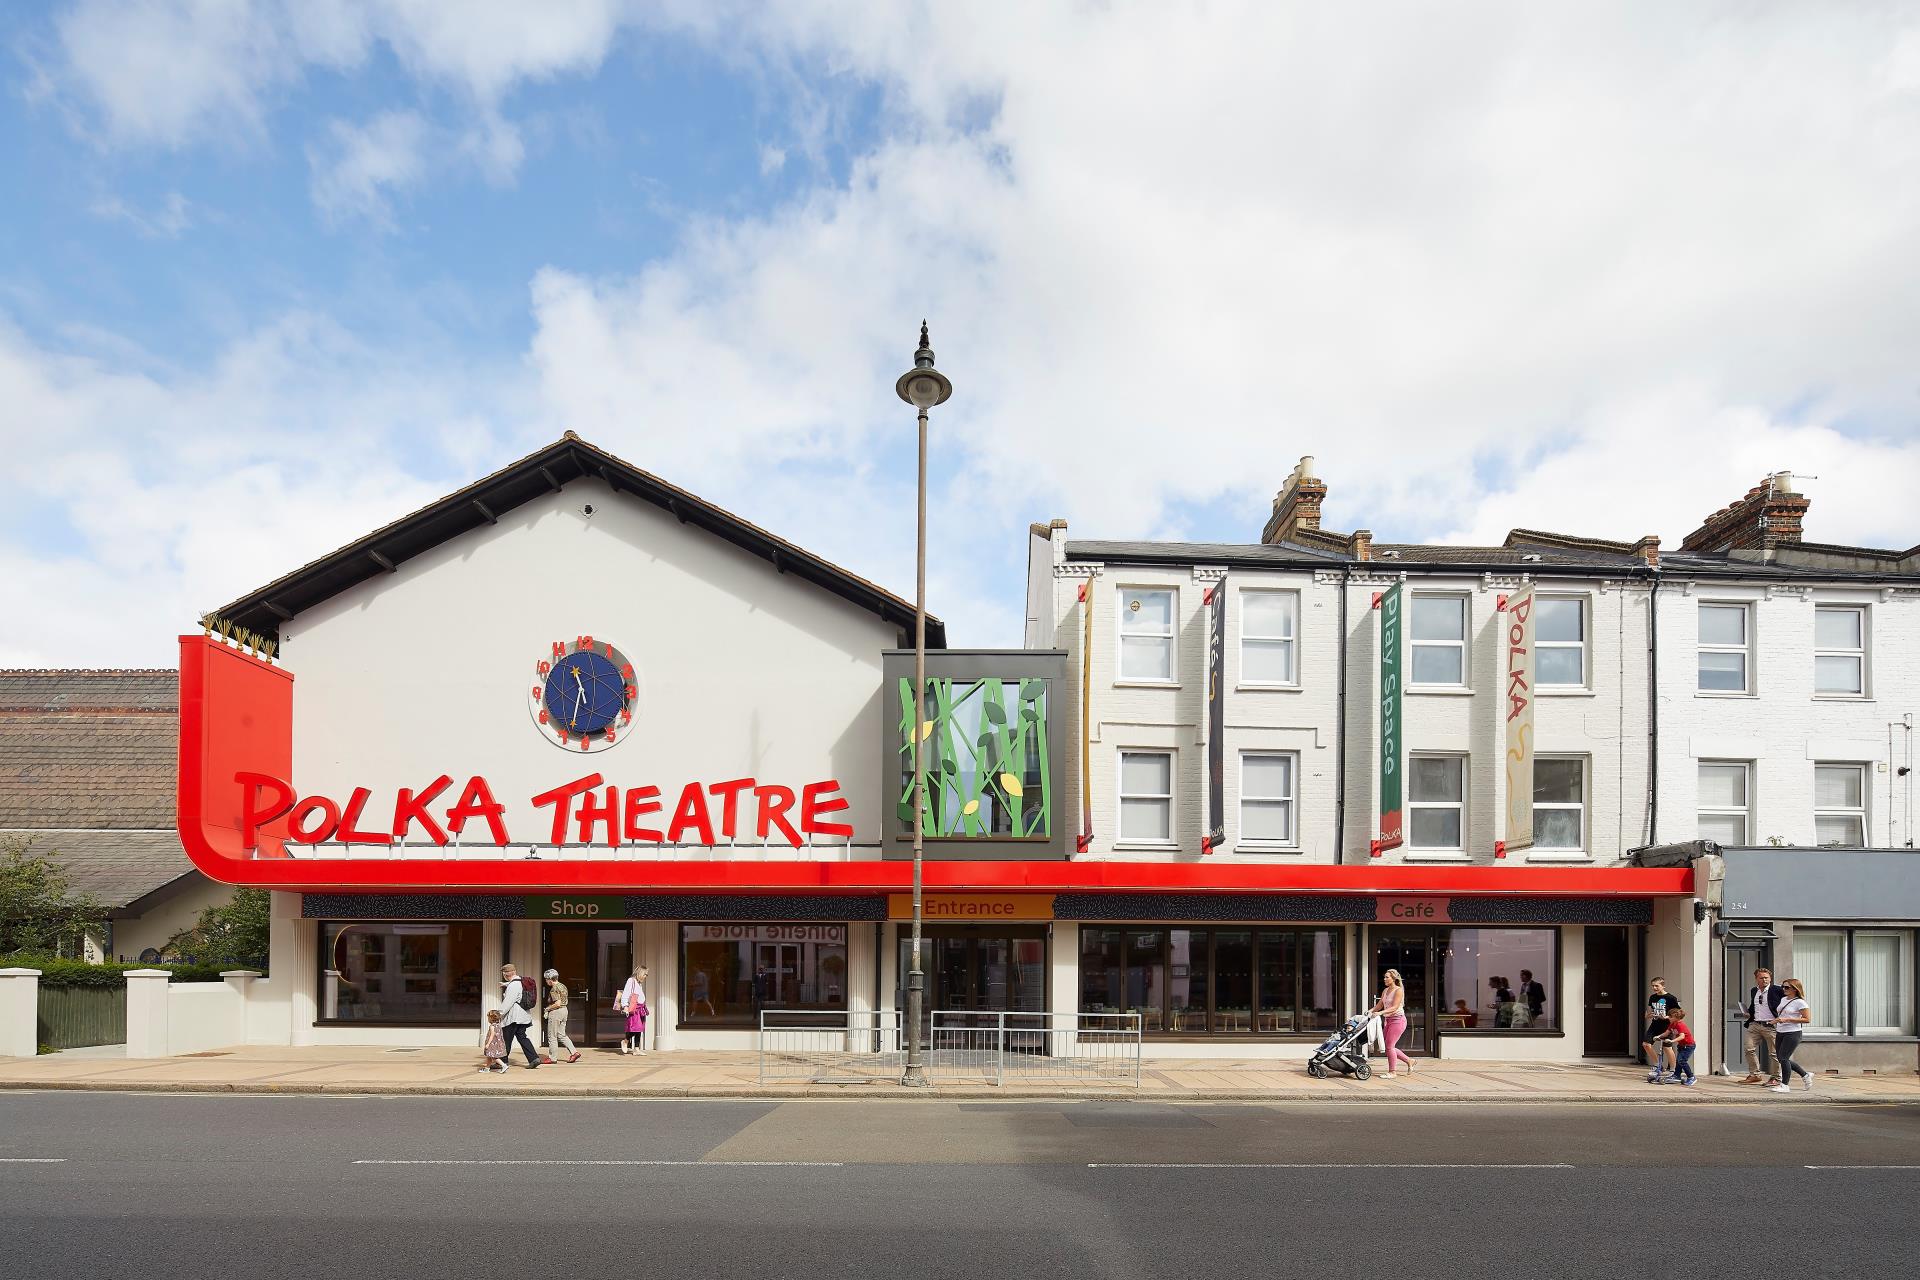 An image of Polka Theatre from the front. A white building with large red letters reading 'Polka Theatre' and a large blue and red clockface.